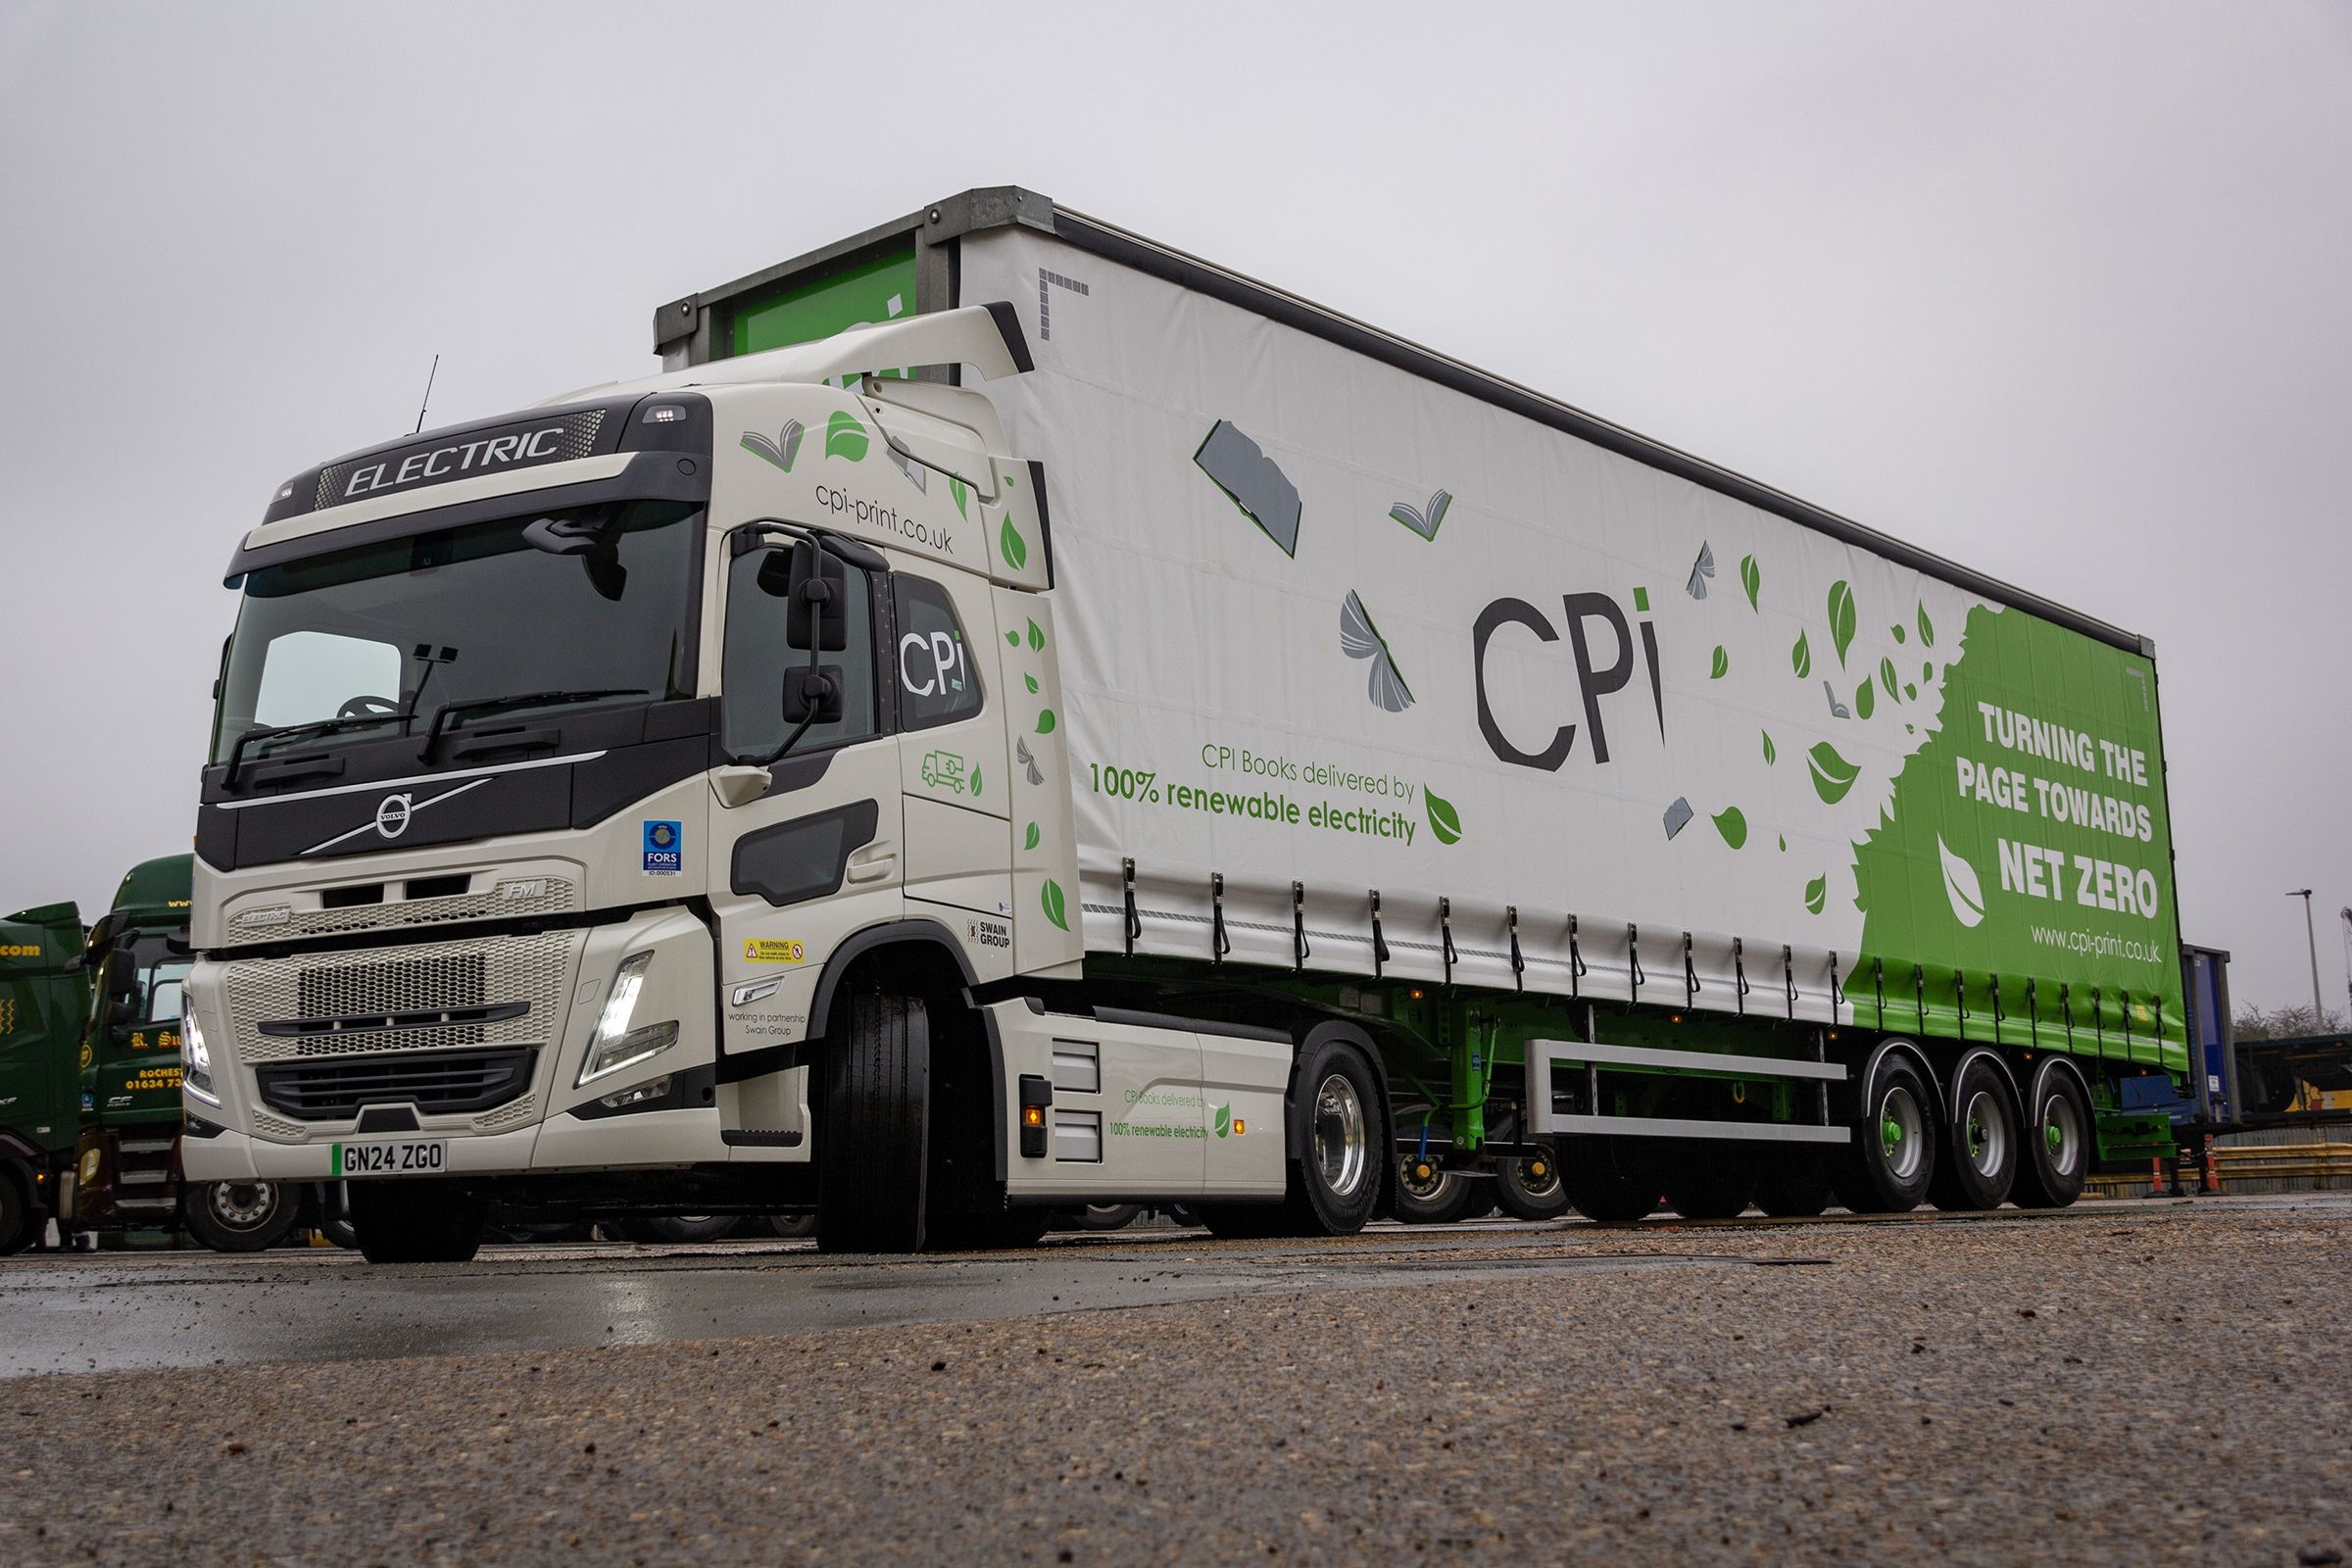 Volvo FM Electric helps R Swain and Sons turn new page for CPI Books' sustainability ambitions